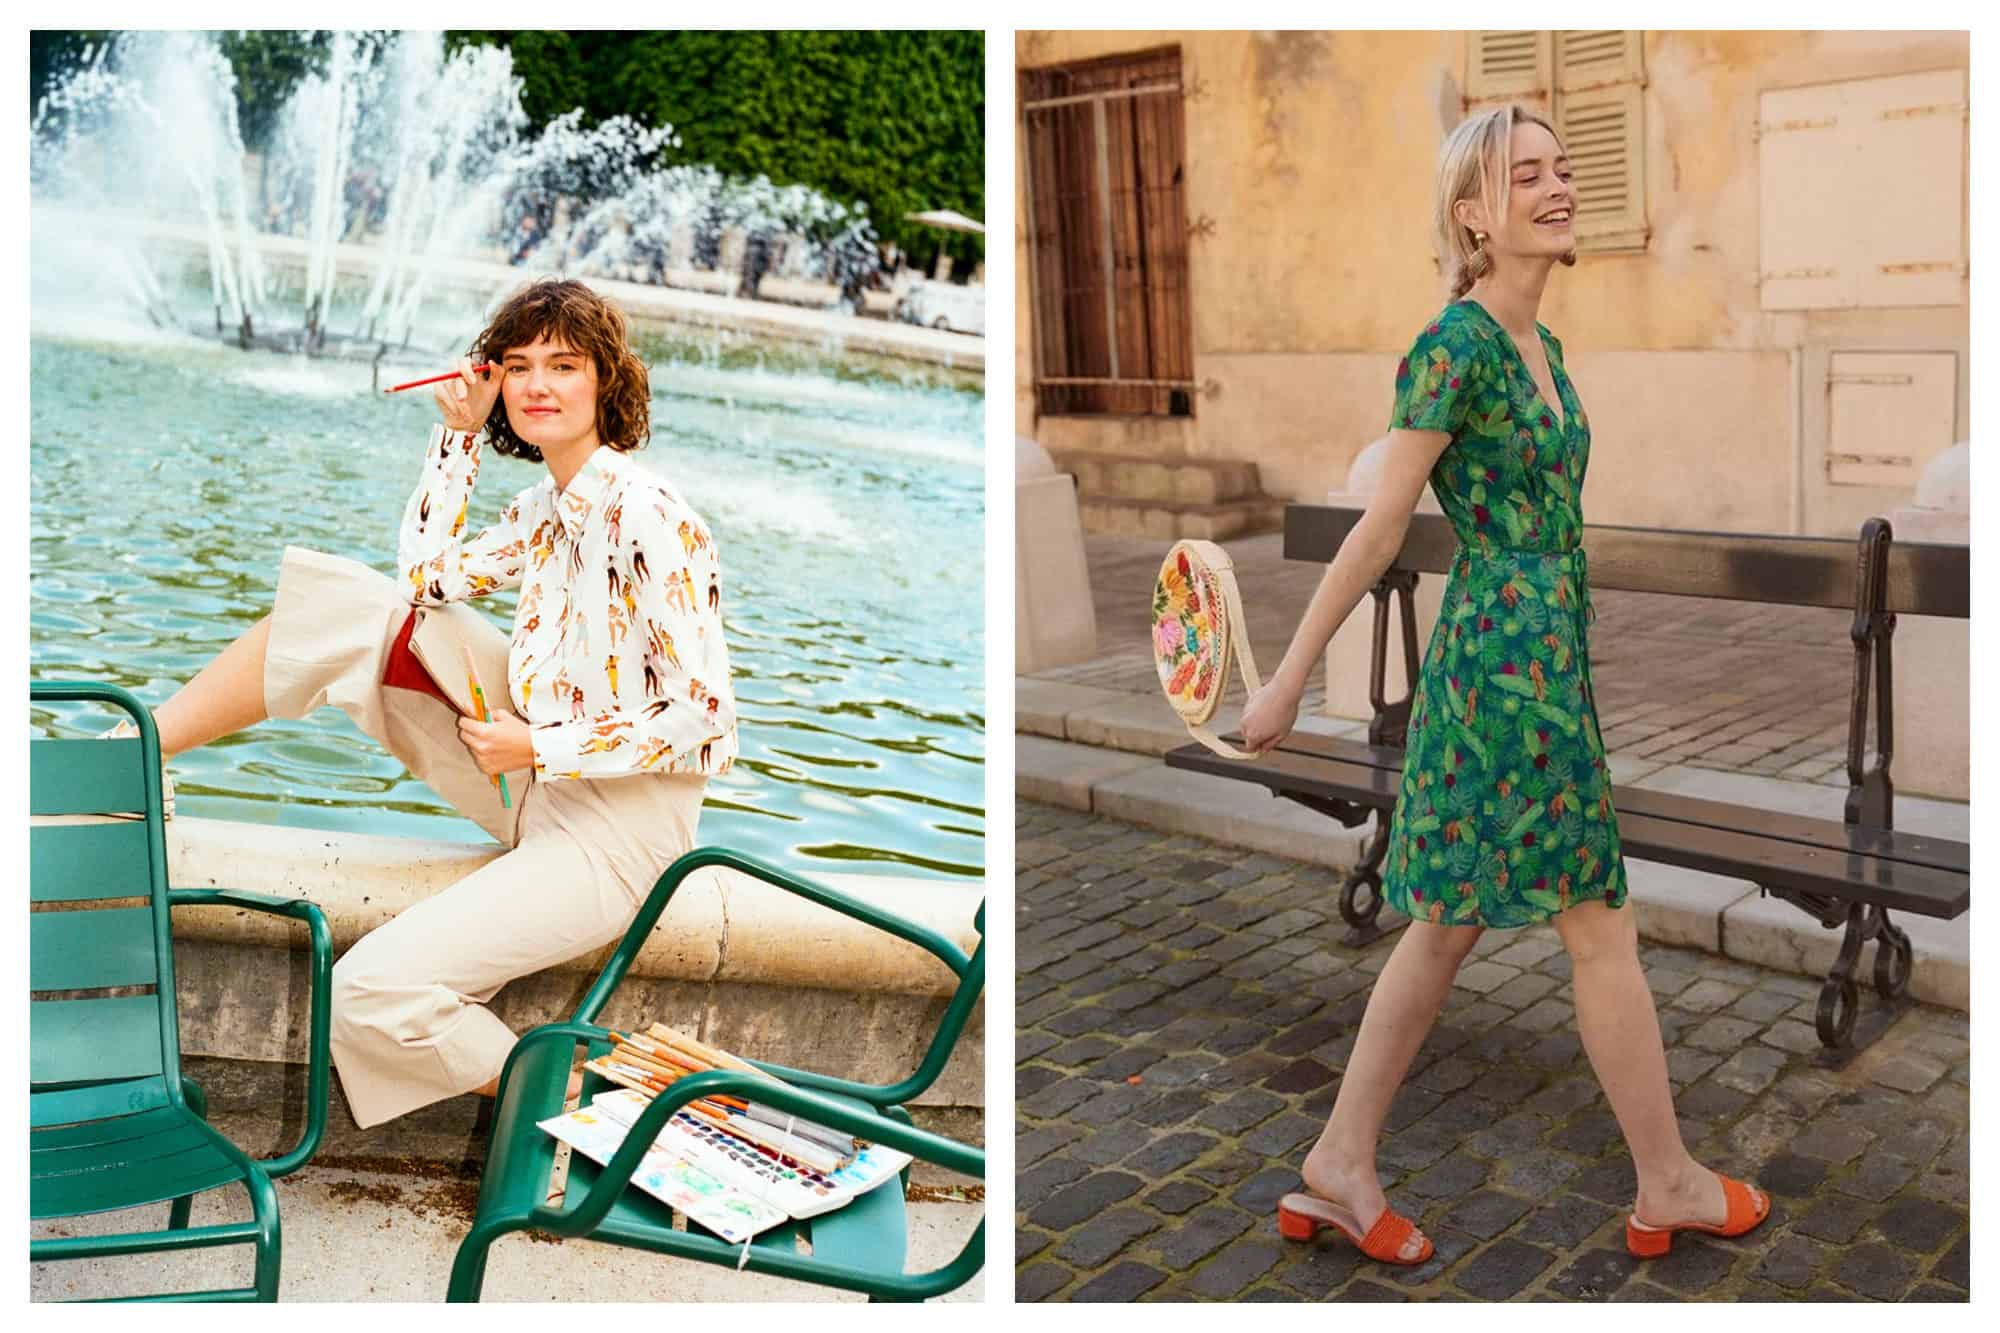 A woman sits on the edge of the fountain at Jardin des Tuileries in Paris wearing a printed cream shirt and beige trousers (left). A woman walks through the cobblestone streets of Paris wearing a deep green knee-length dress and orange open-toed mules (right). Both outfits are from one of our favorite fashion brands Soi Paris.